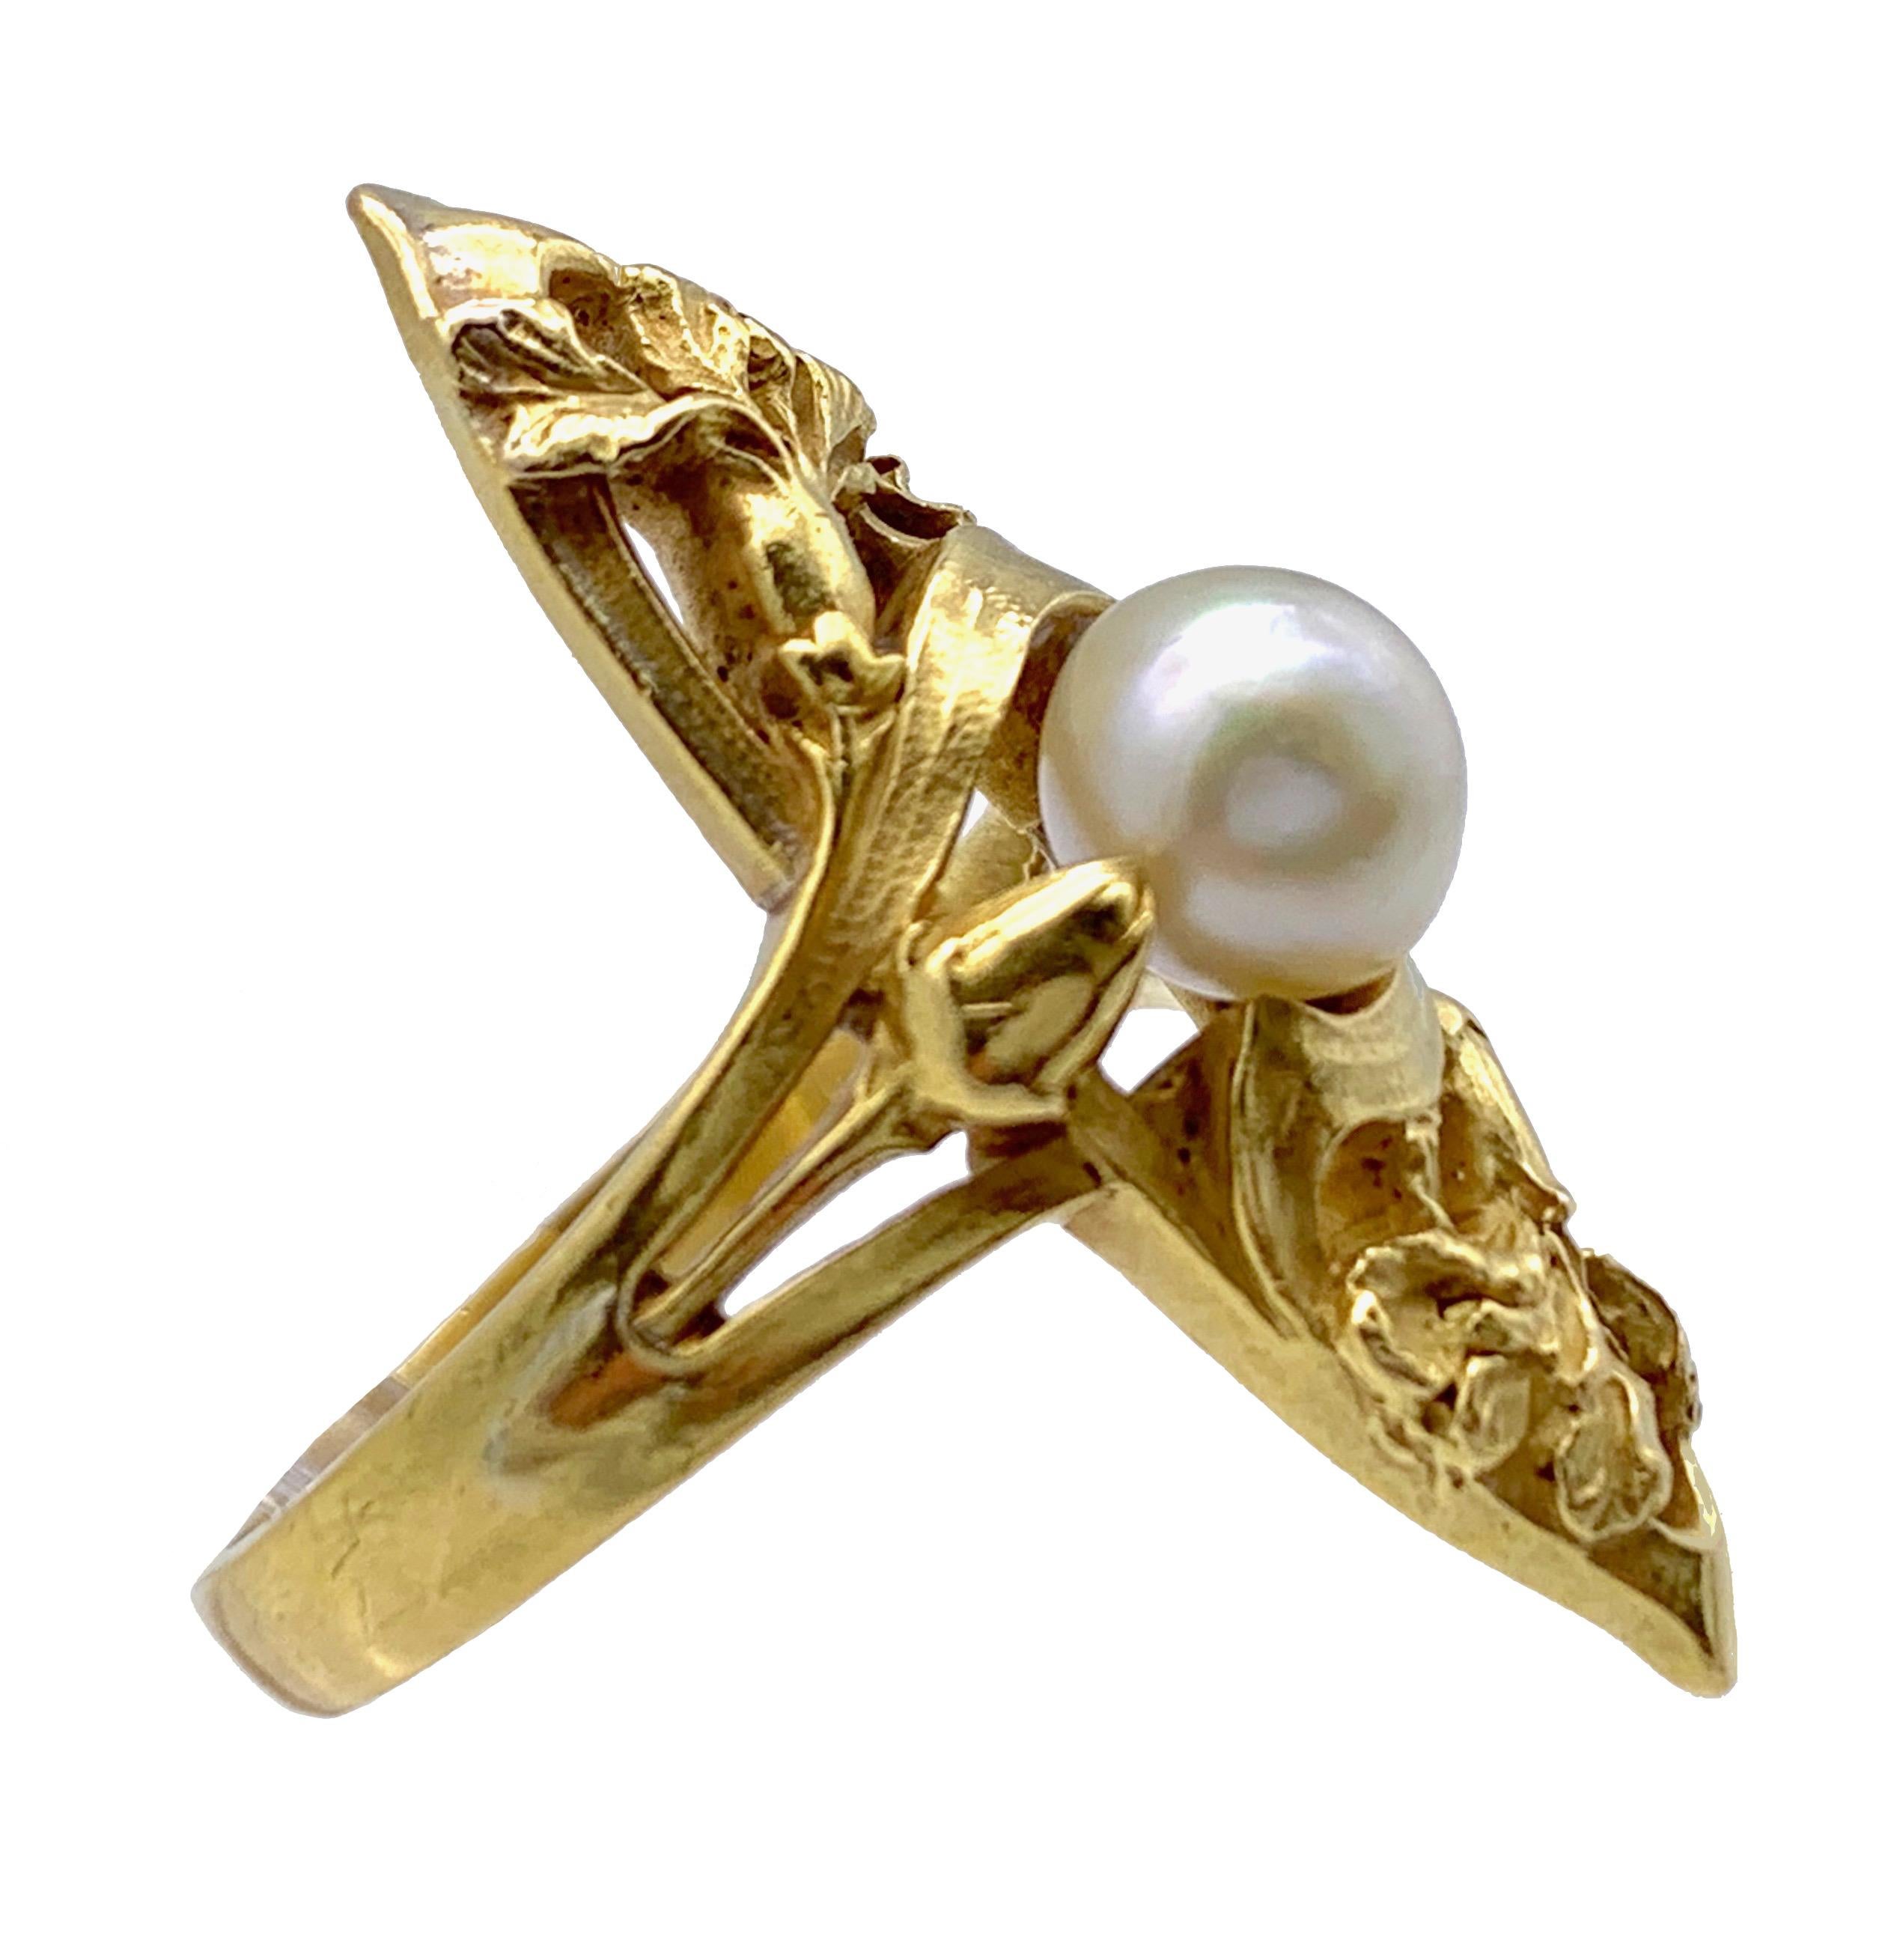 This finely modelled and extremely rare French Art Nouveau ring features two entwined irises and two flower buds surrounding a fine white oriental pearl. This elegant and harmoniously designed piece of jewellery is beautifully chiseled, solid and a